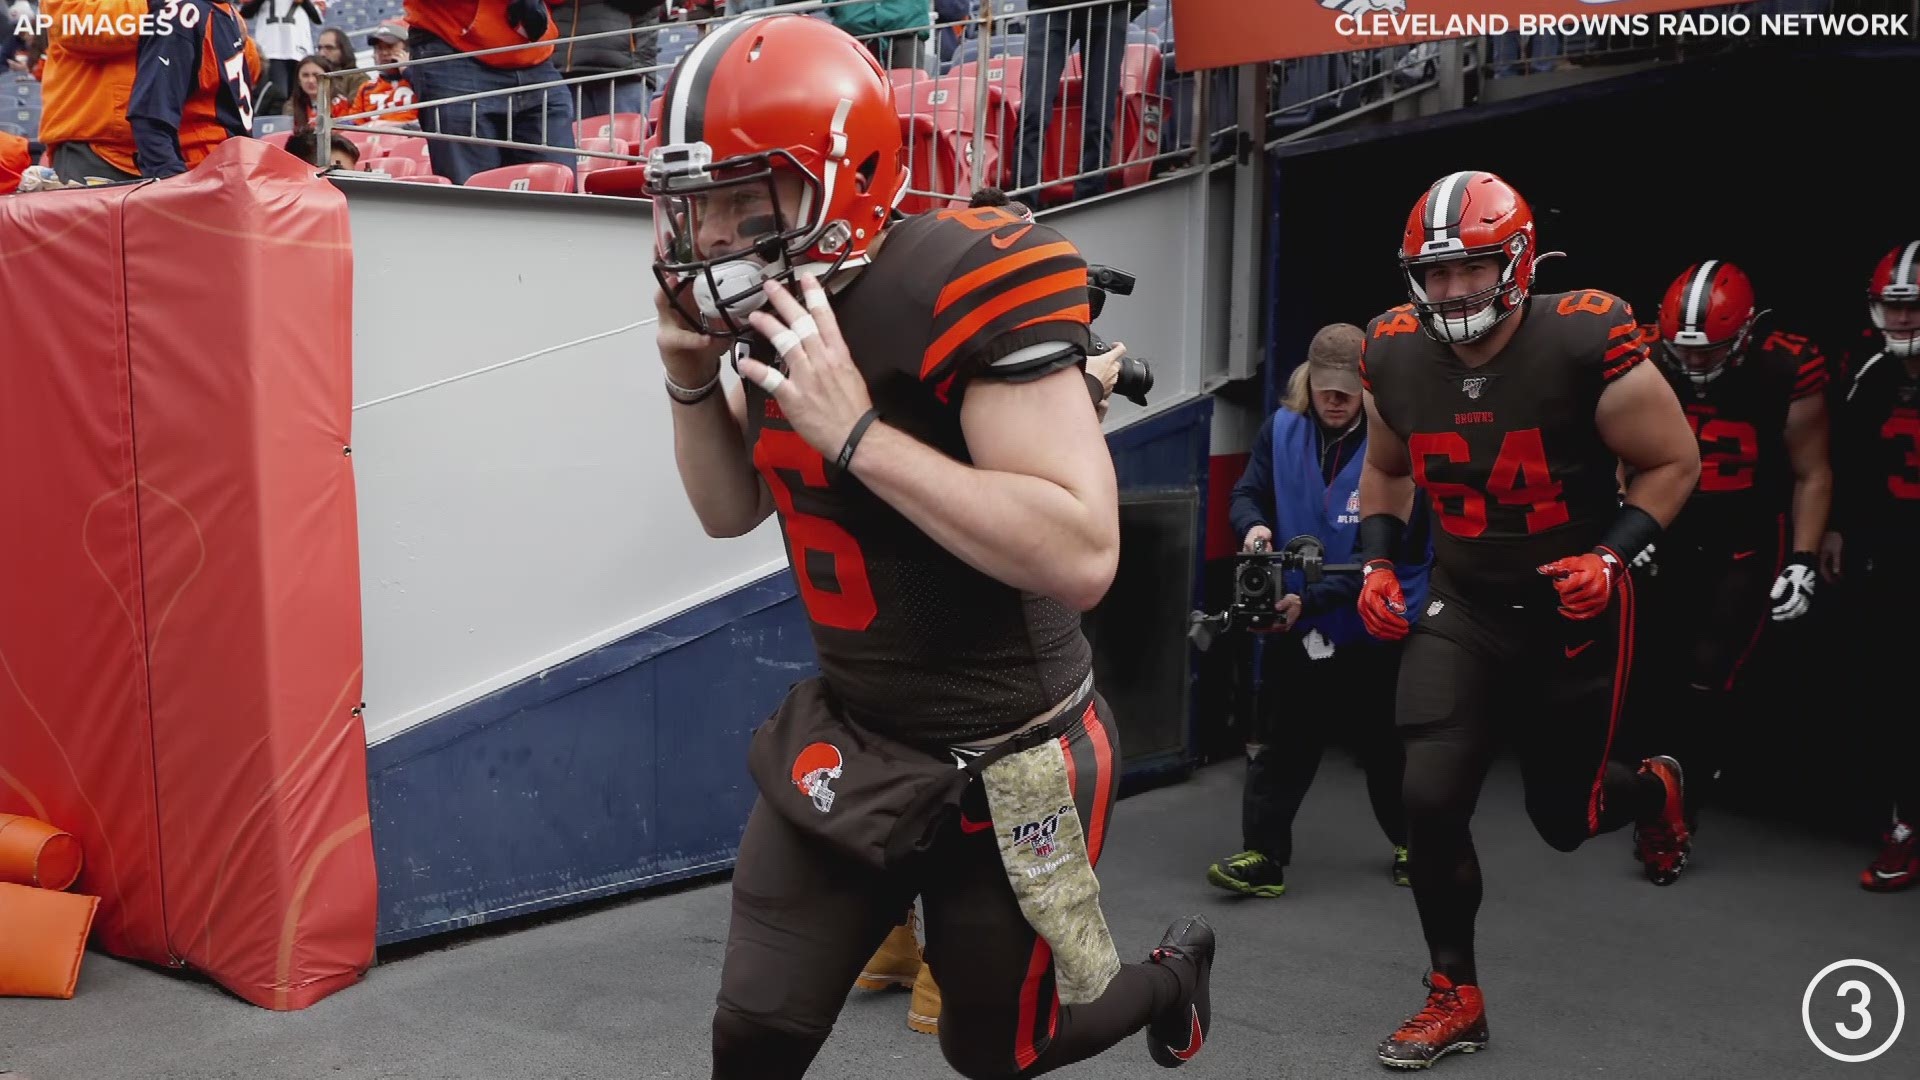 Dreams dashed in Denver!  The Cleveland Browns dropped to 2-6 on the season with a 24-19 loss to the Denver Broncos at Empower Field in Denver Sunday.